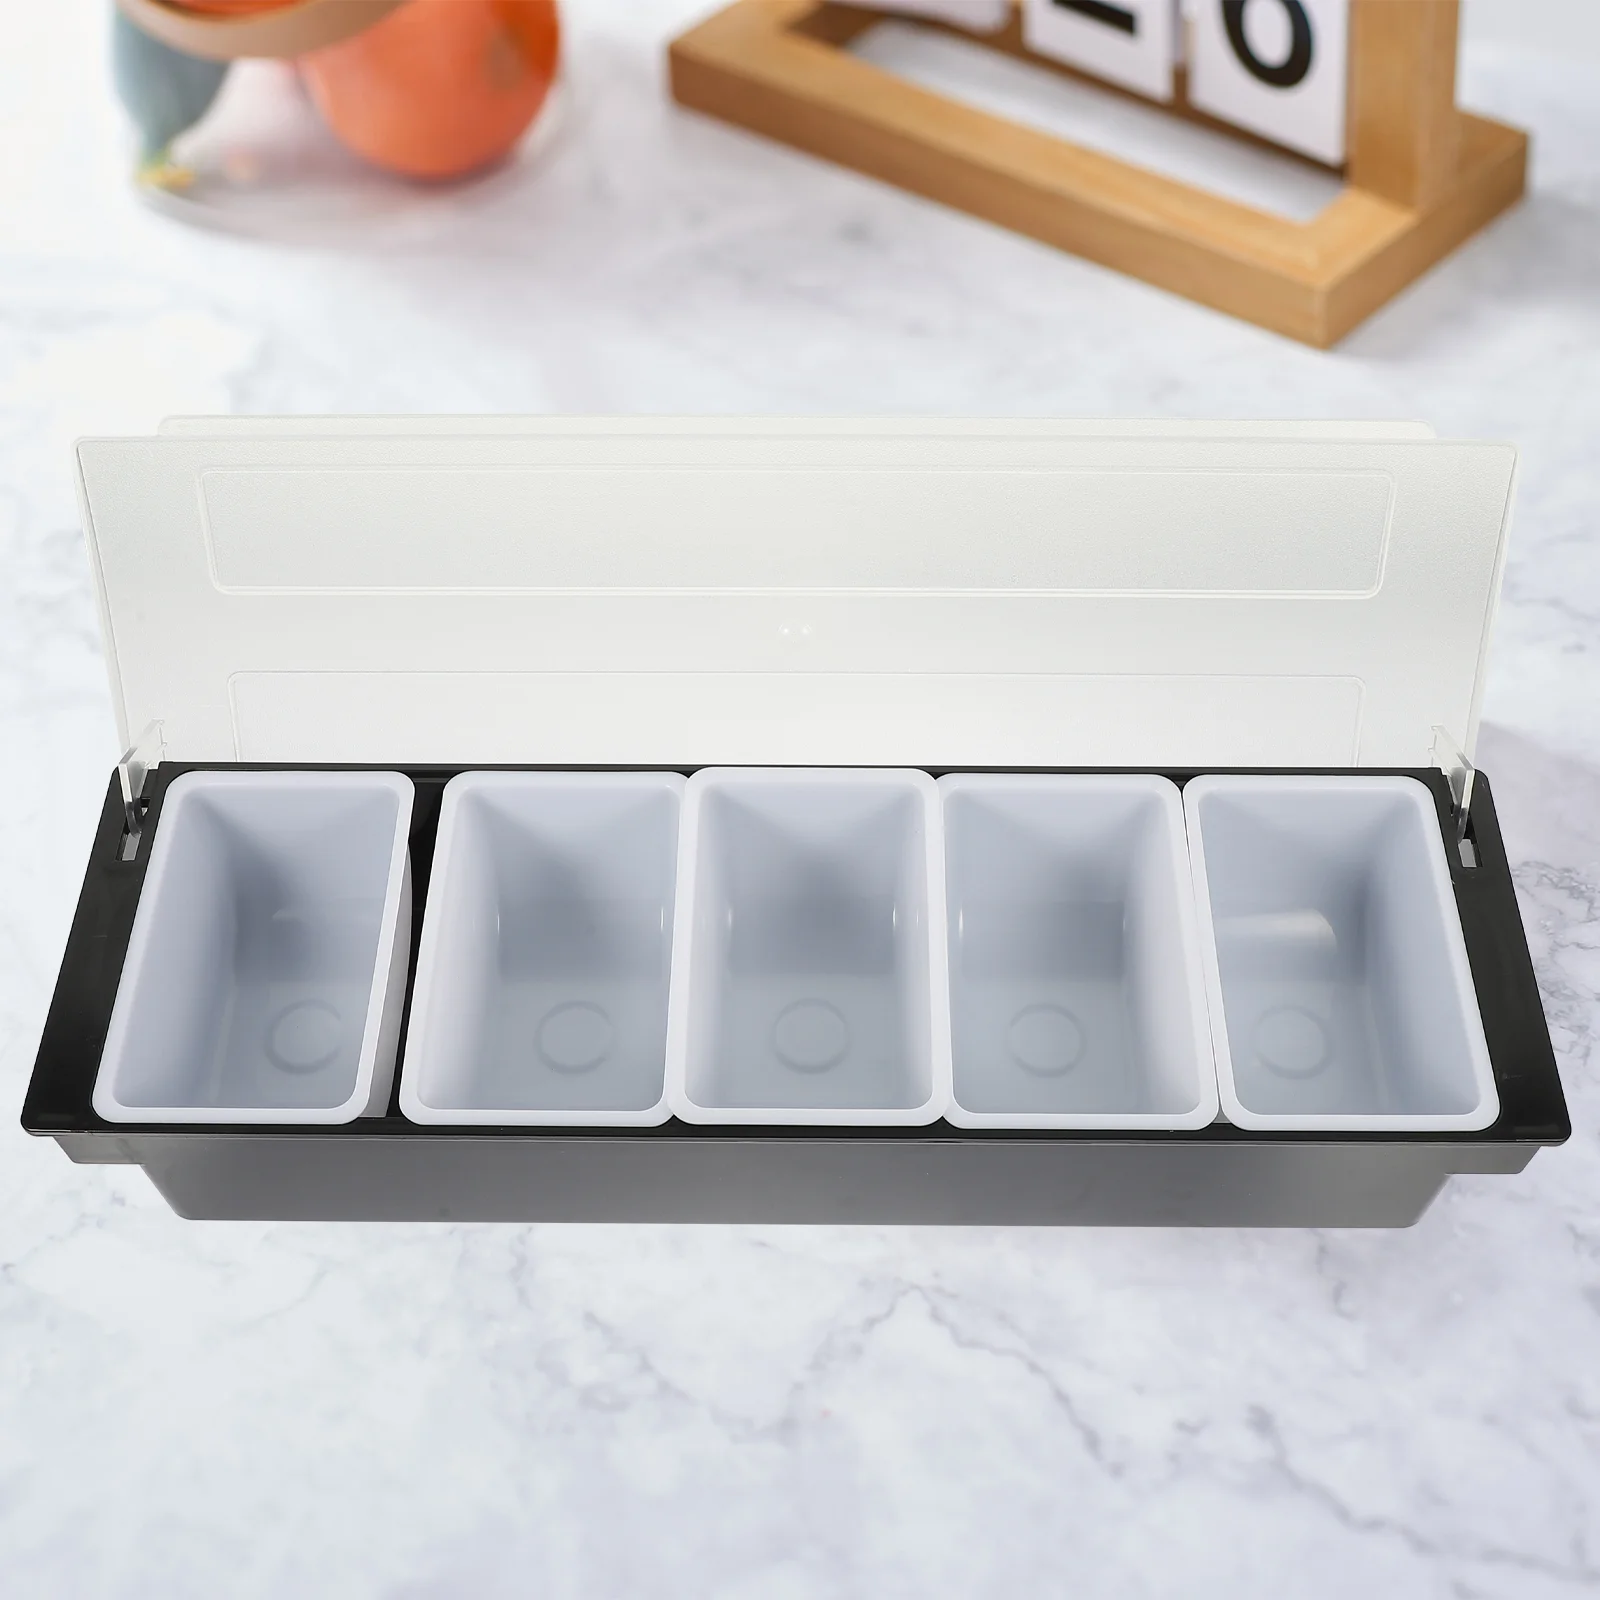 

Serving Tray Condiment Plate Trays Party Snack Dividedchilledfruitice Candy Bar Liddish Box Server Kitchen Compartment Garnish